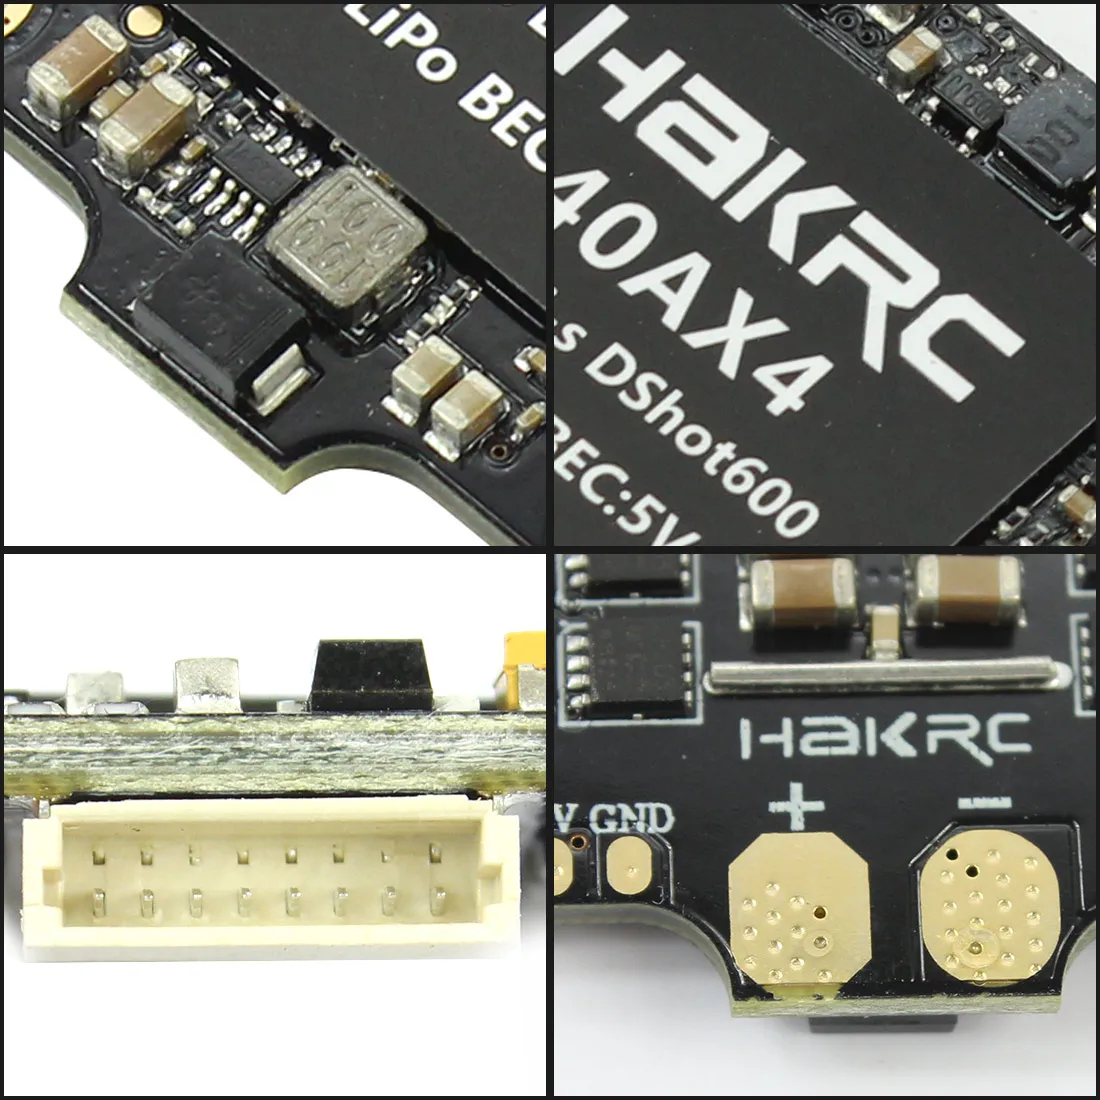 

Hakrc 4 In 1 30A / 40A Blheli_S BB2 Dshot 150/300/600 Mini ESC Speed Controller 2-5S for DIY FPV Racing Drone Multcopter Outdoor